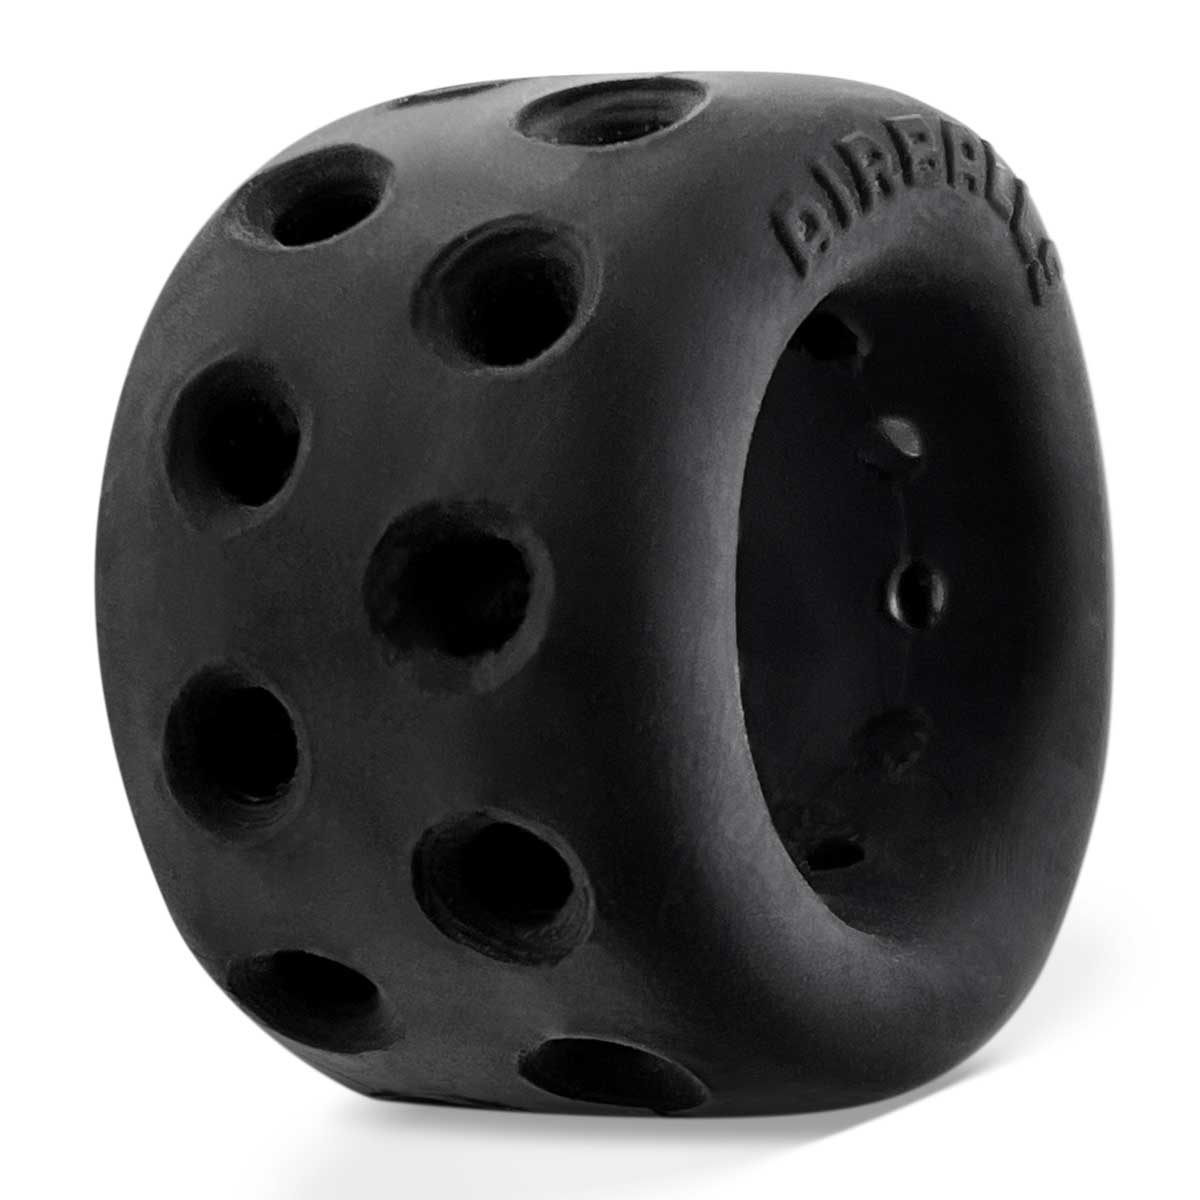 what is a ball stretcher, ball stretcher leather